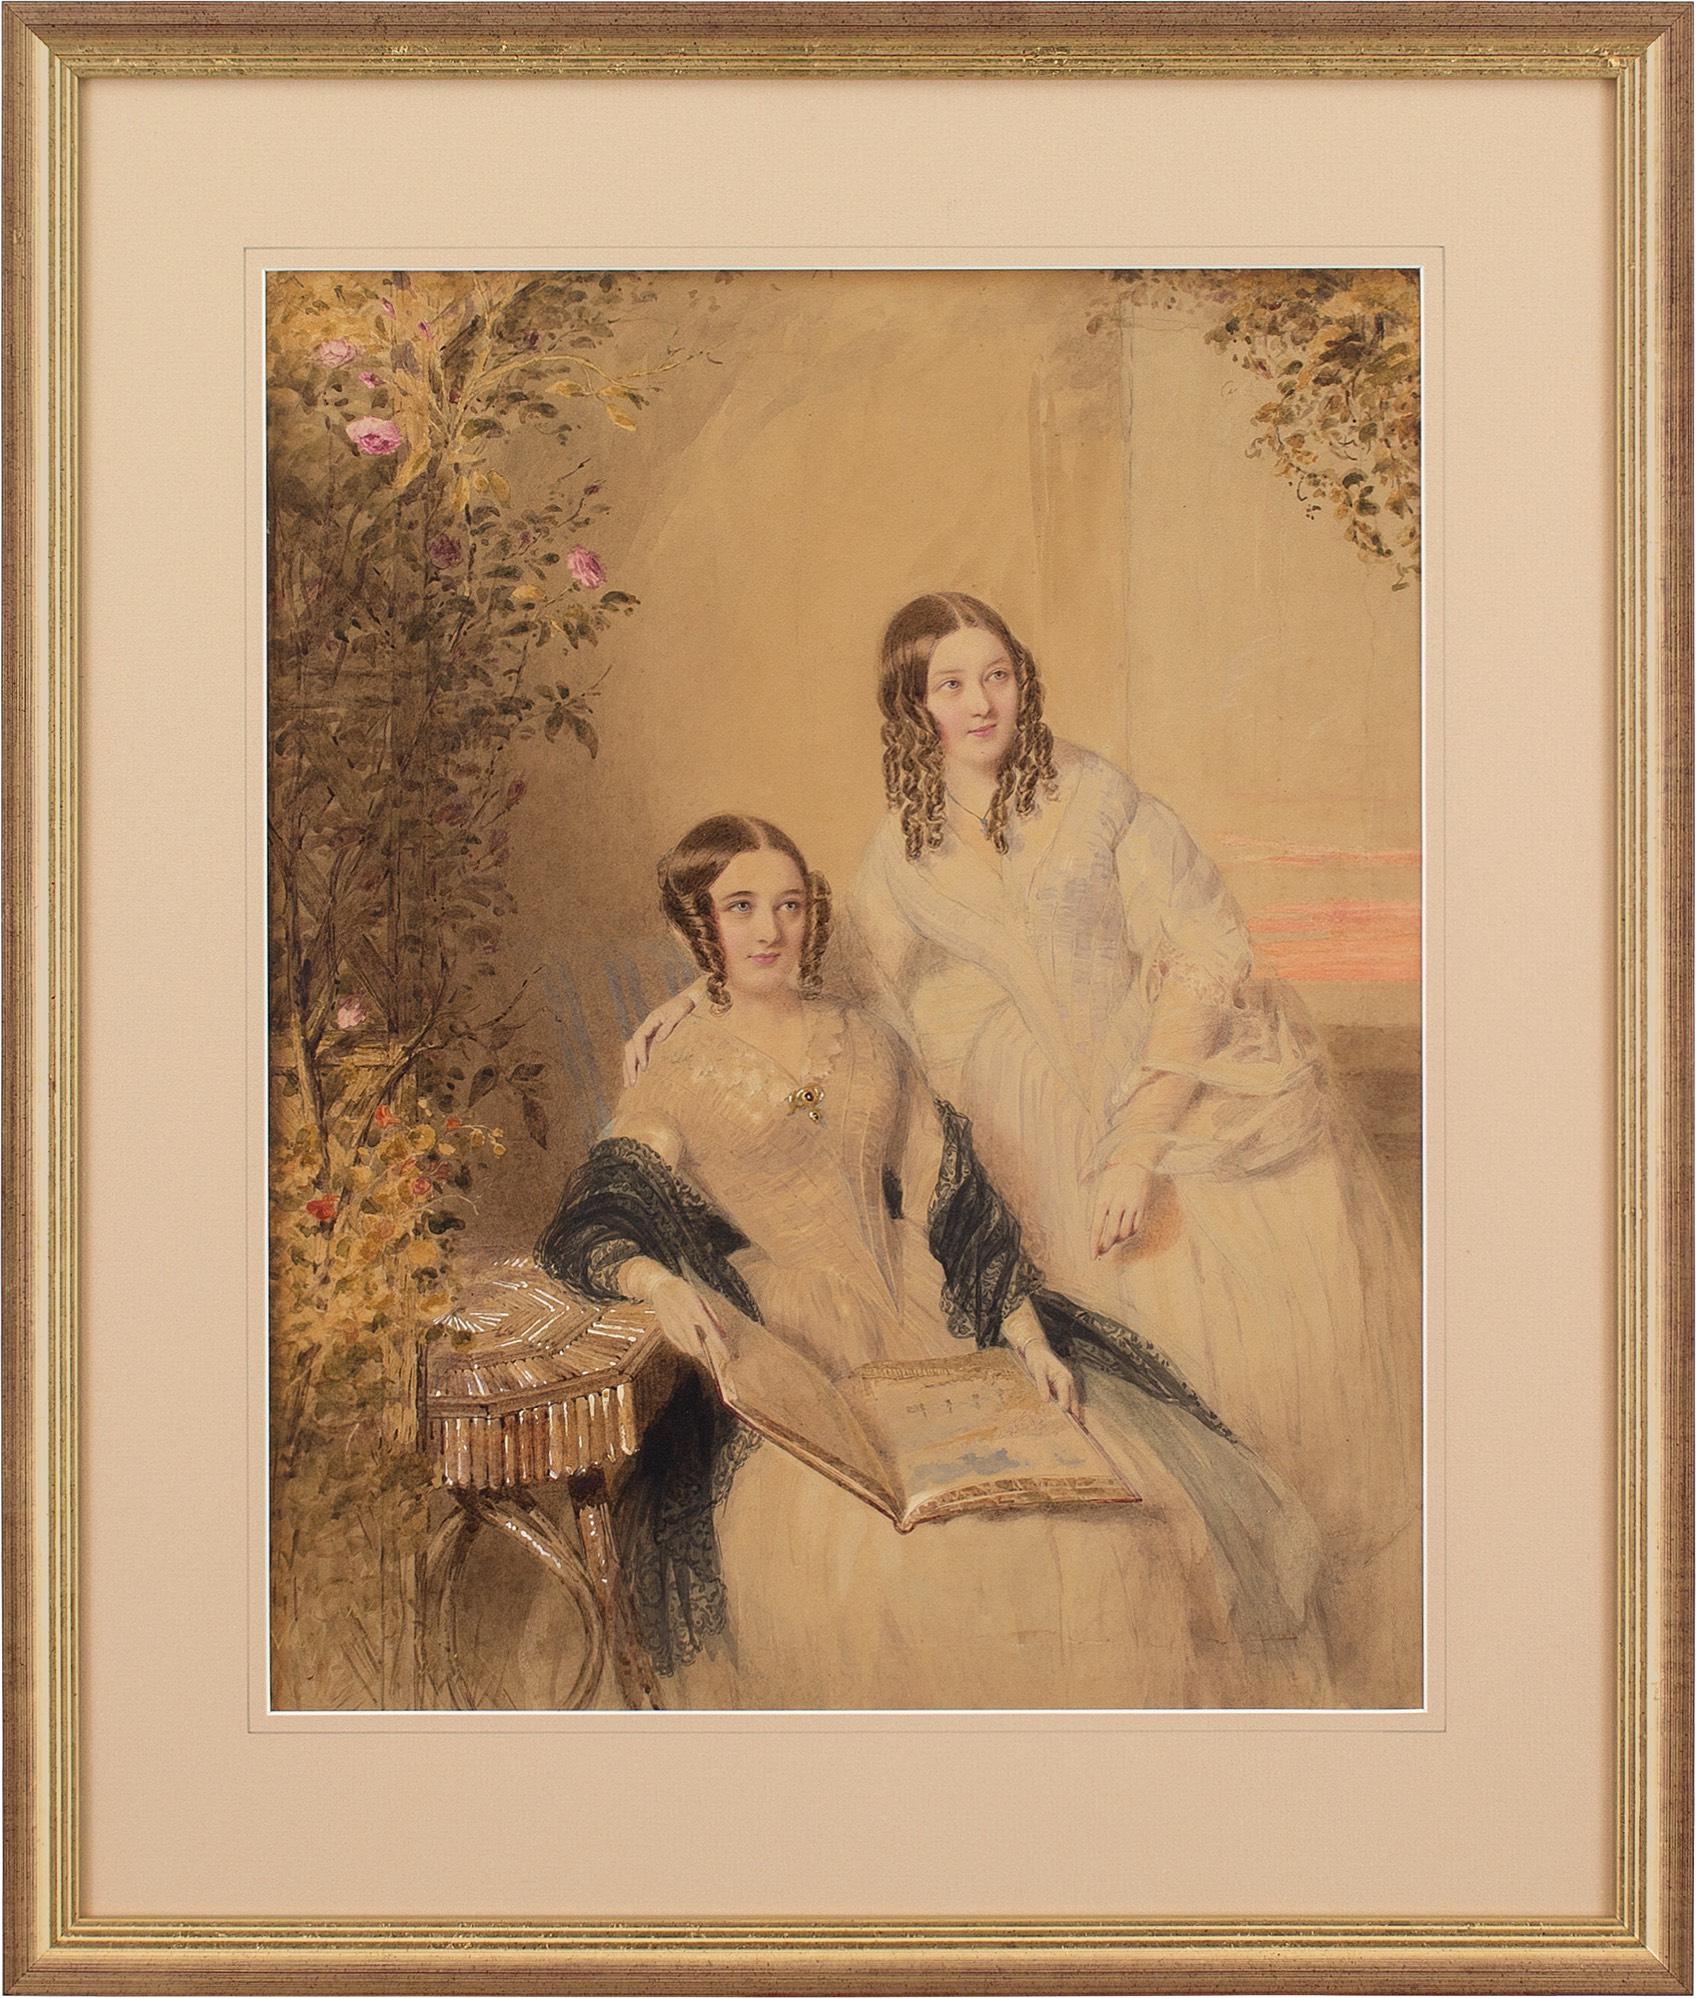 William Drummond, Portrait Of Two Sisters, Watercolour